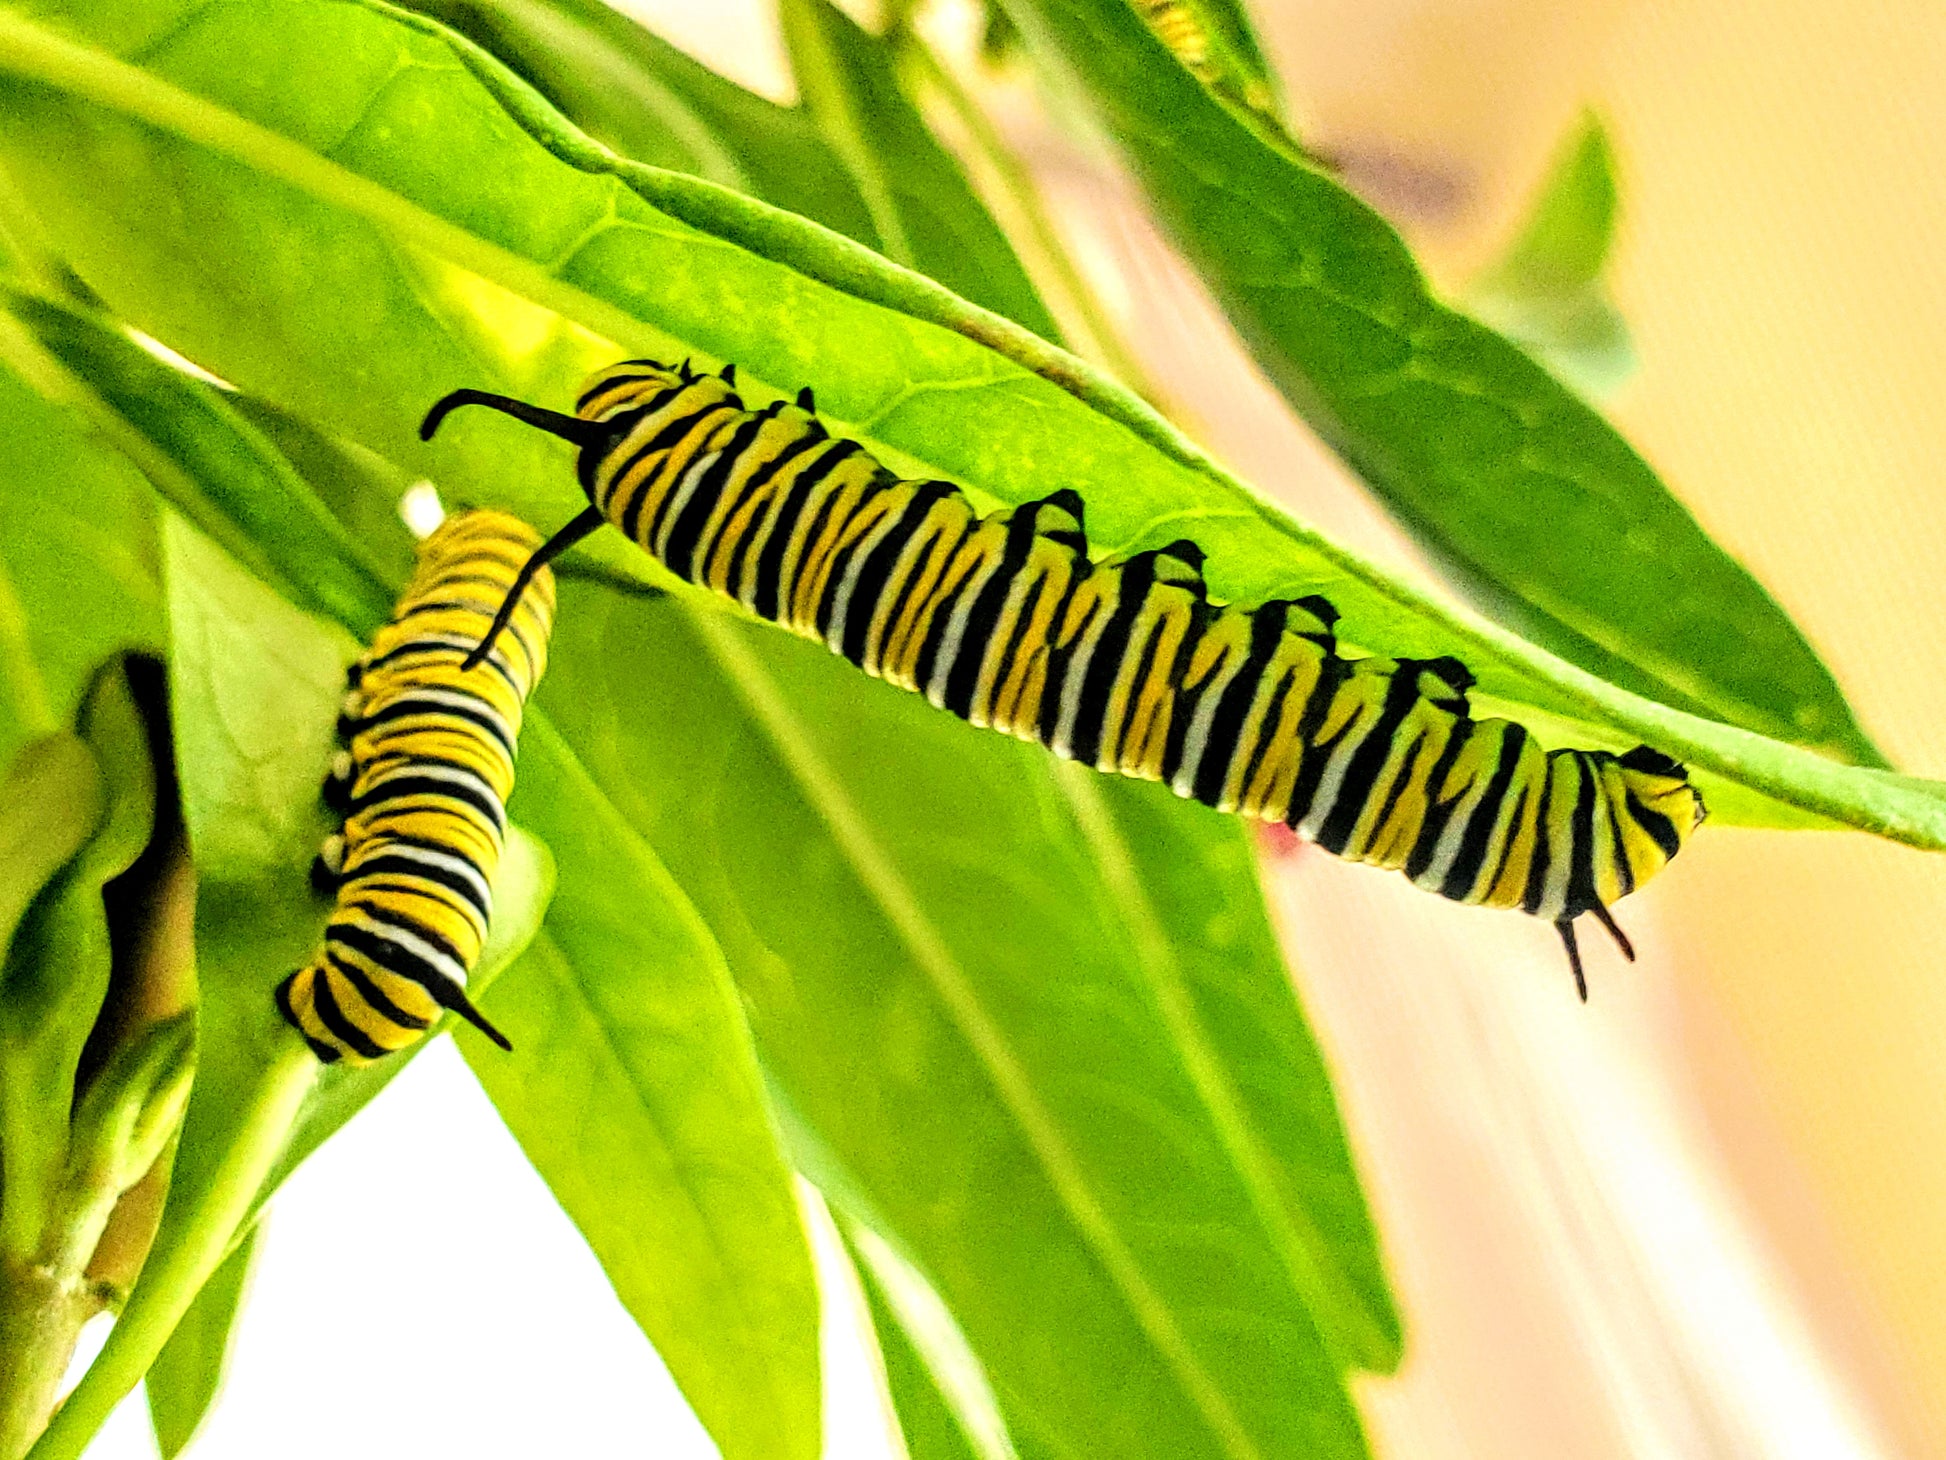 Monarch Butterfly Kits to Raise Baby Caterpillars into Butterflies – Monarch  Butterfly Life